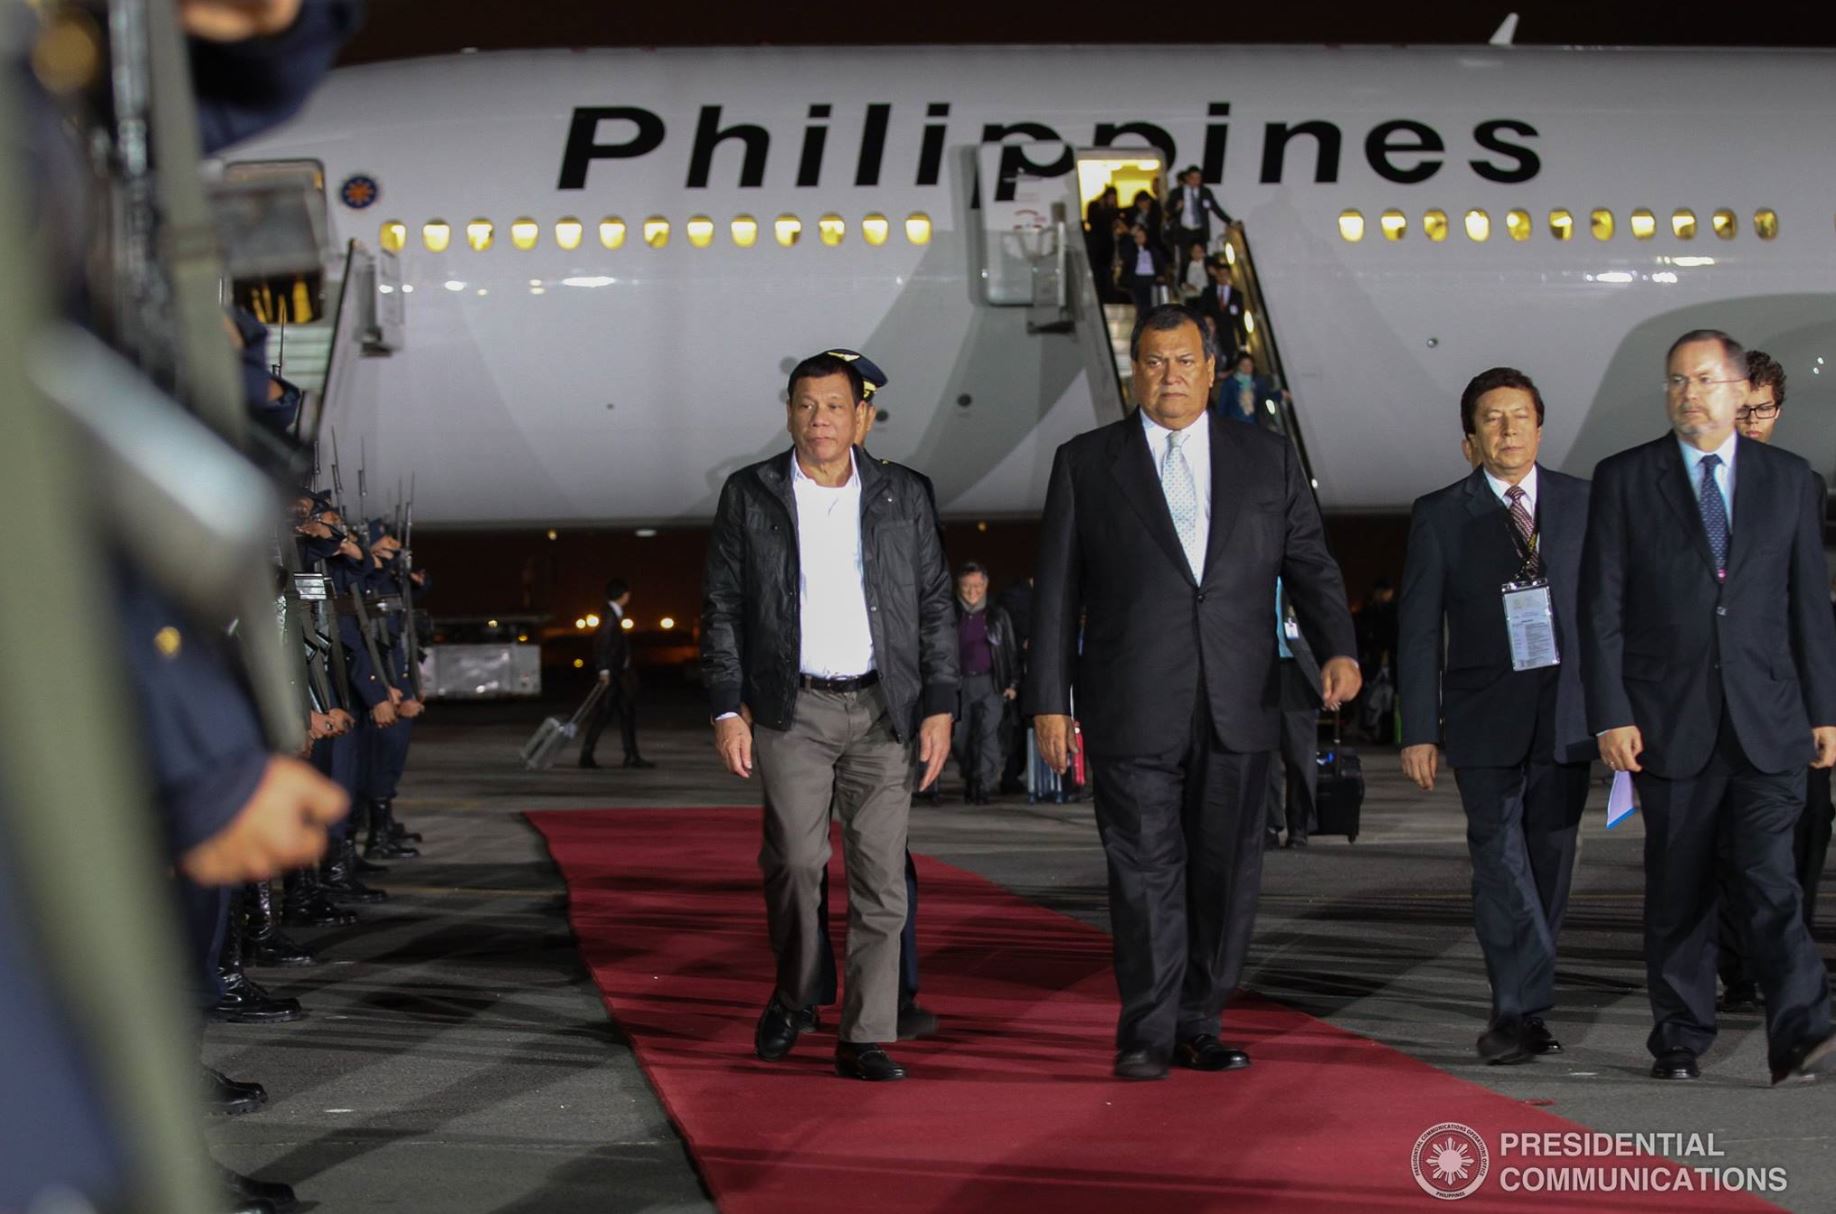 President Rodrigo Duterte is welcomed by Peruvian Minister of Culture Jorge Nieto Montesinos upon his arrival at Jorge Chavez International Airport in Lima, Peru on November 17, 2016.  (Presidential Communications) 